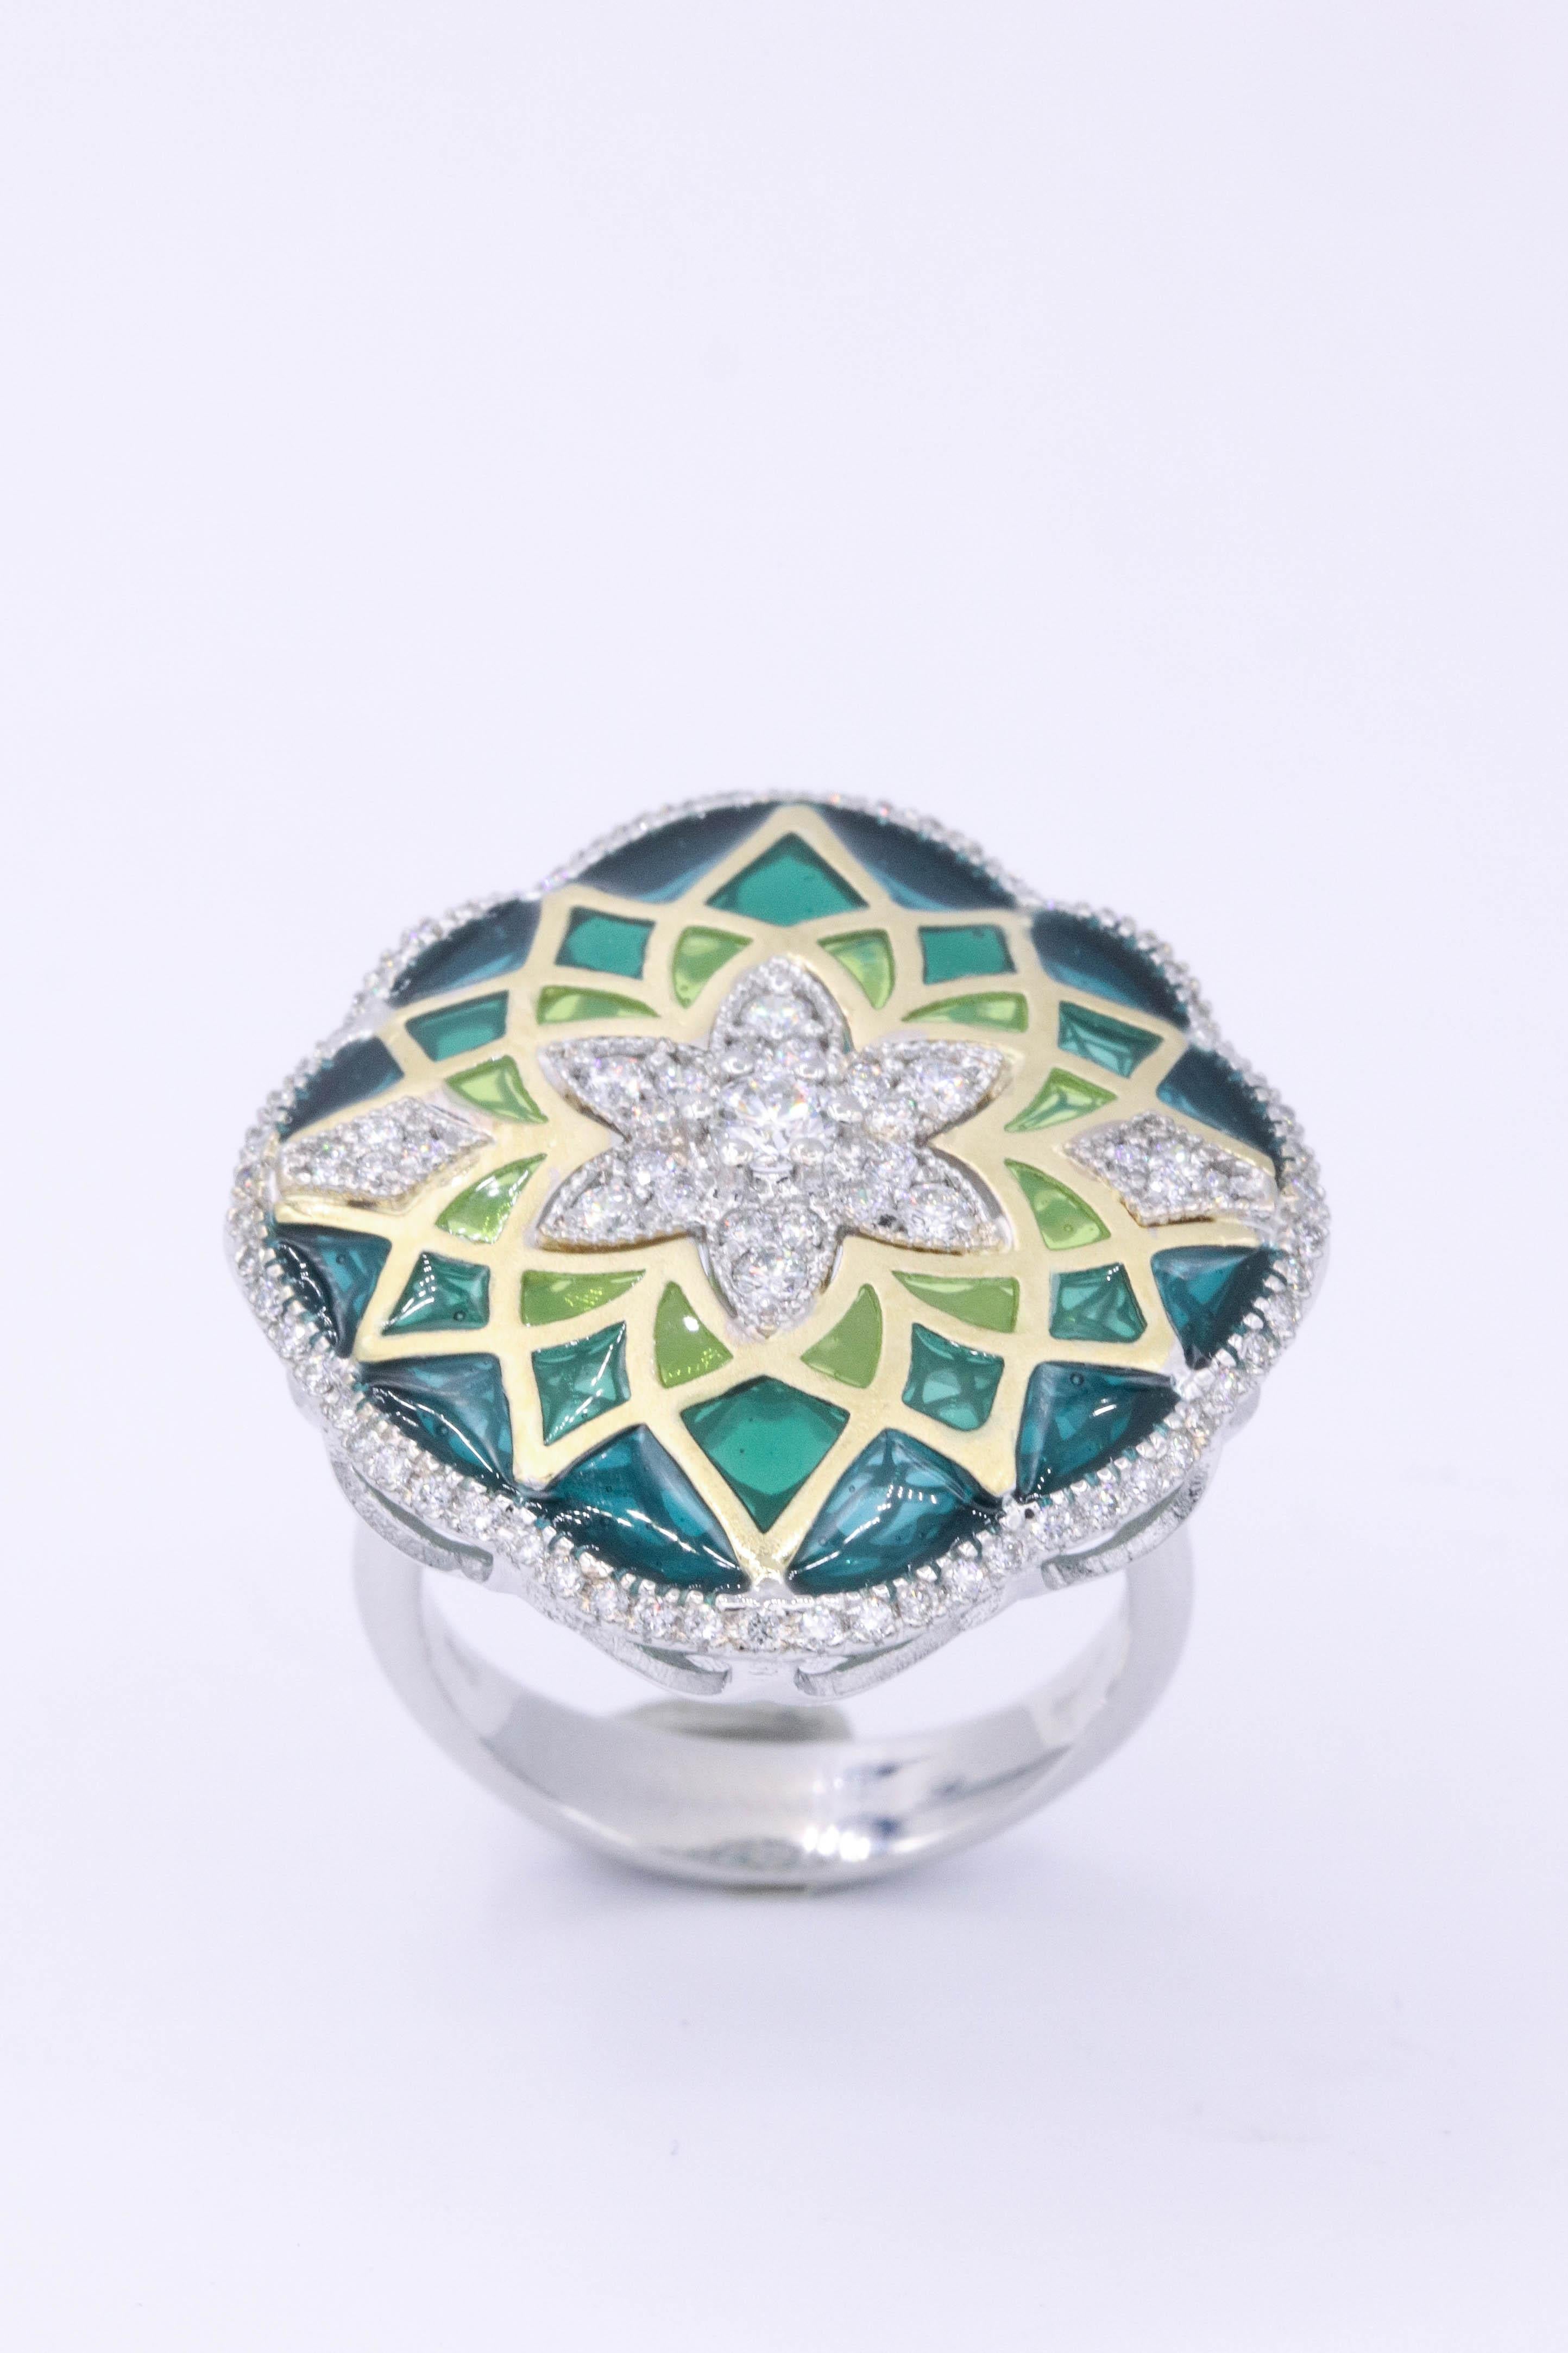 Italian Green Enamel and Diamond Floral Cocktail Ring 0.73 Carats 18K 1